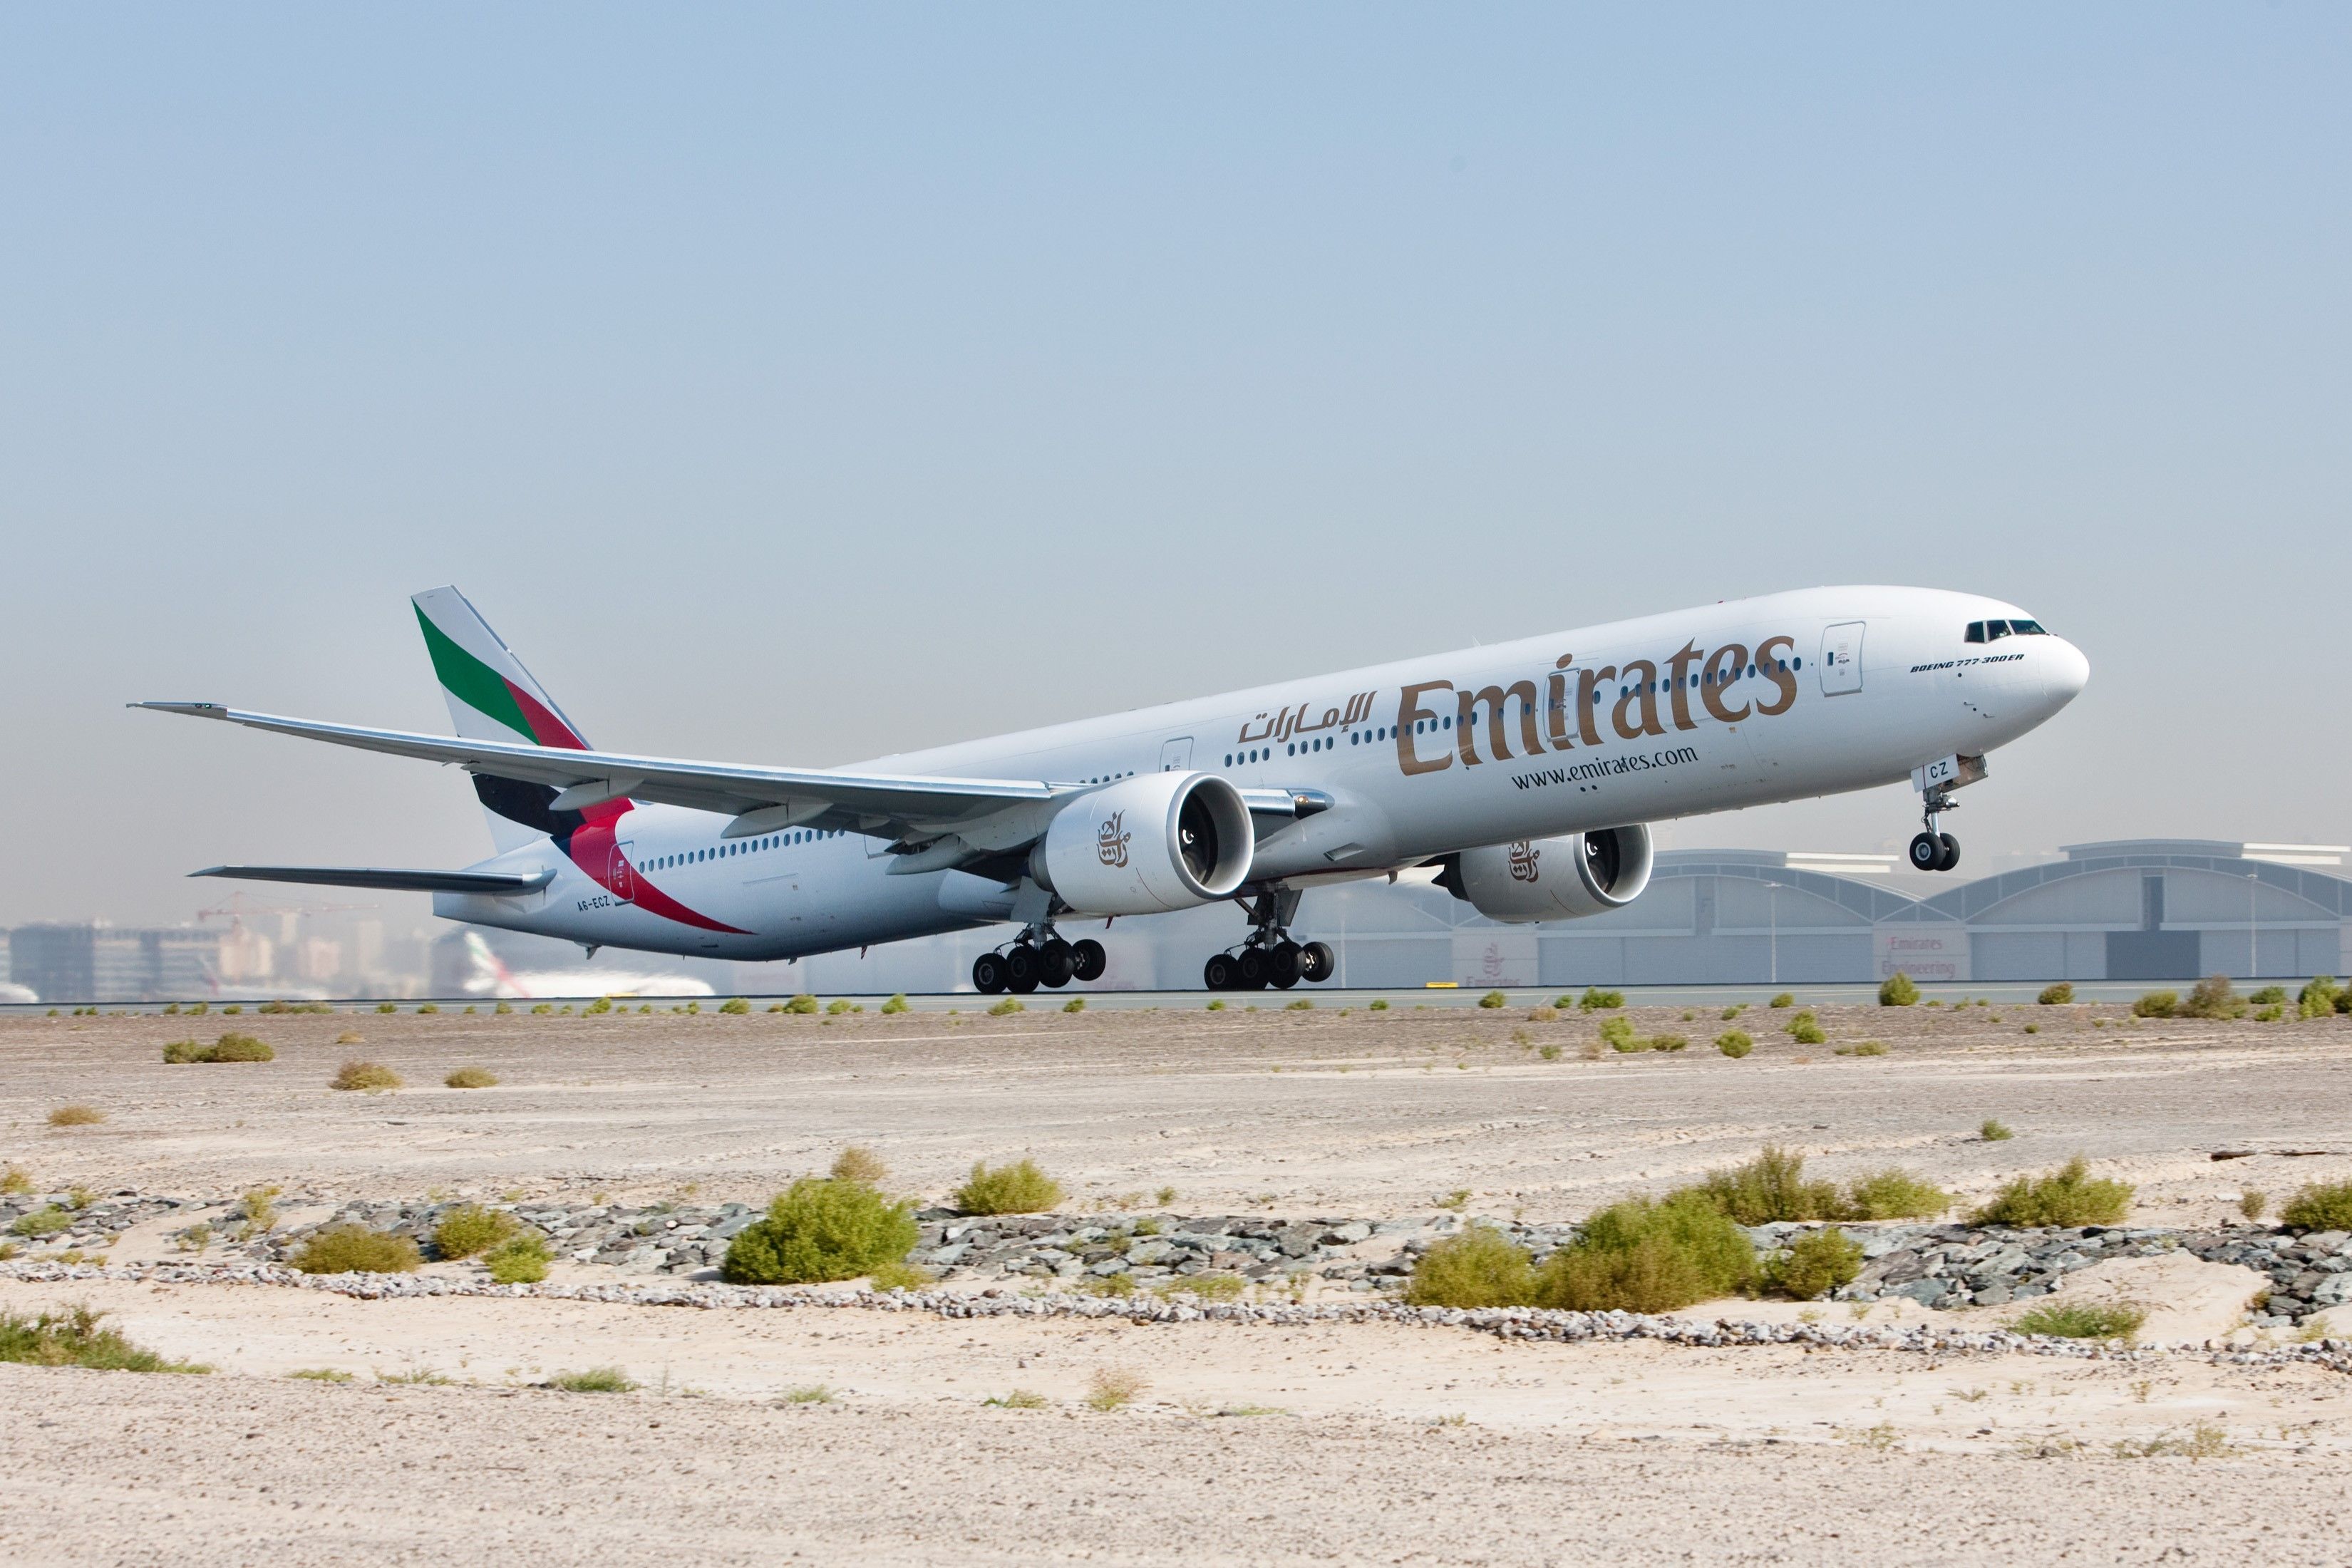 Emirates Boeing 777-300ER Taking Off In Sunny Conditions